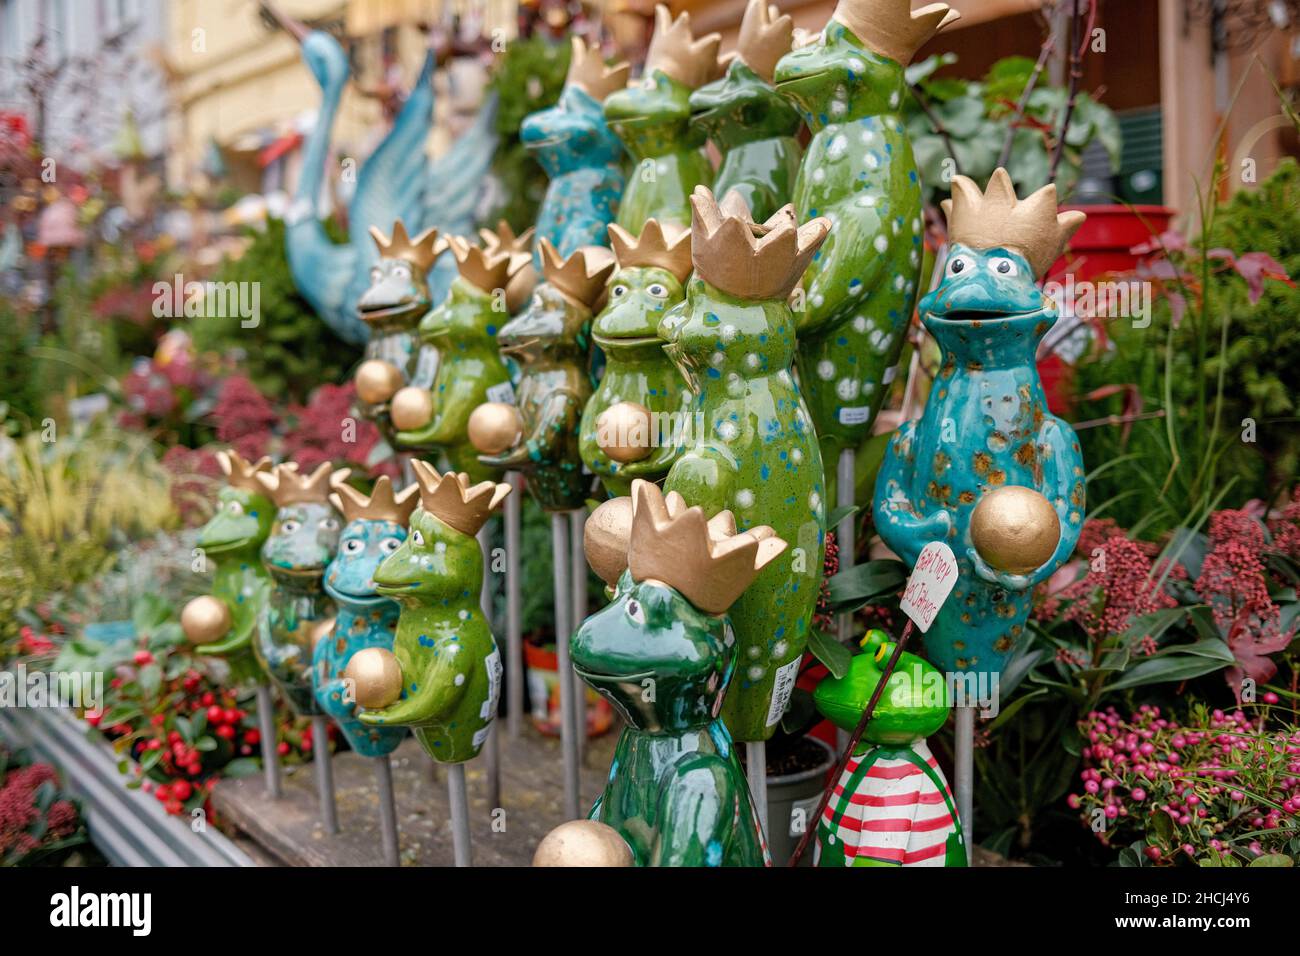 A closeup shot of ceramic figurines and decorations in an outdoor market Stock Photo